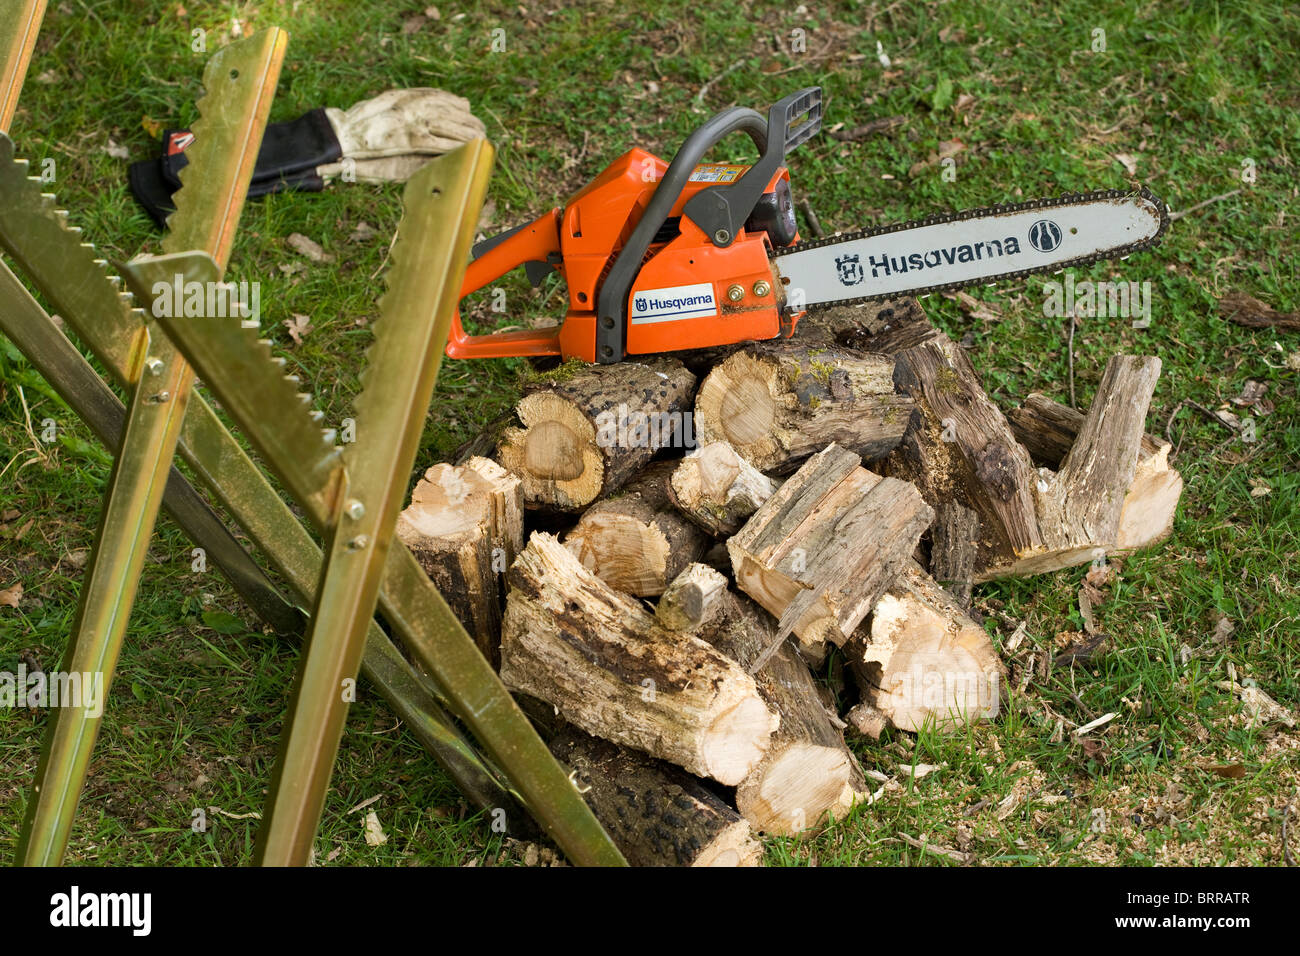 Chainsaw , saw horse, gloves and sawn logs Stock Photo